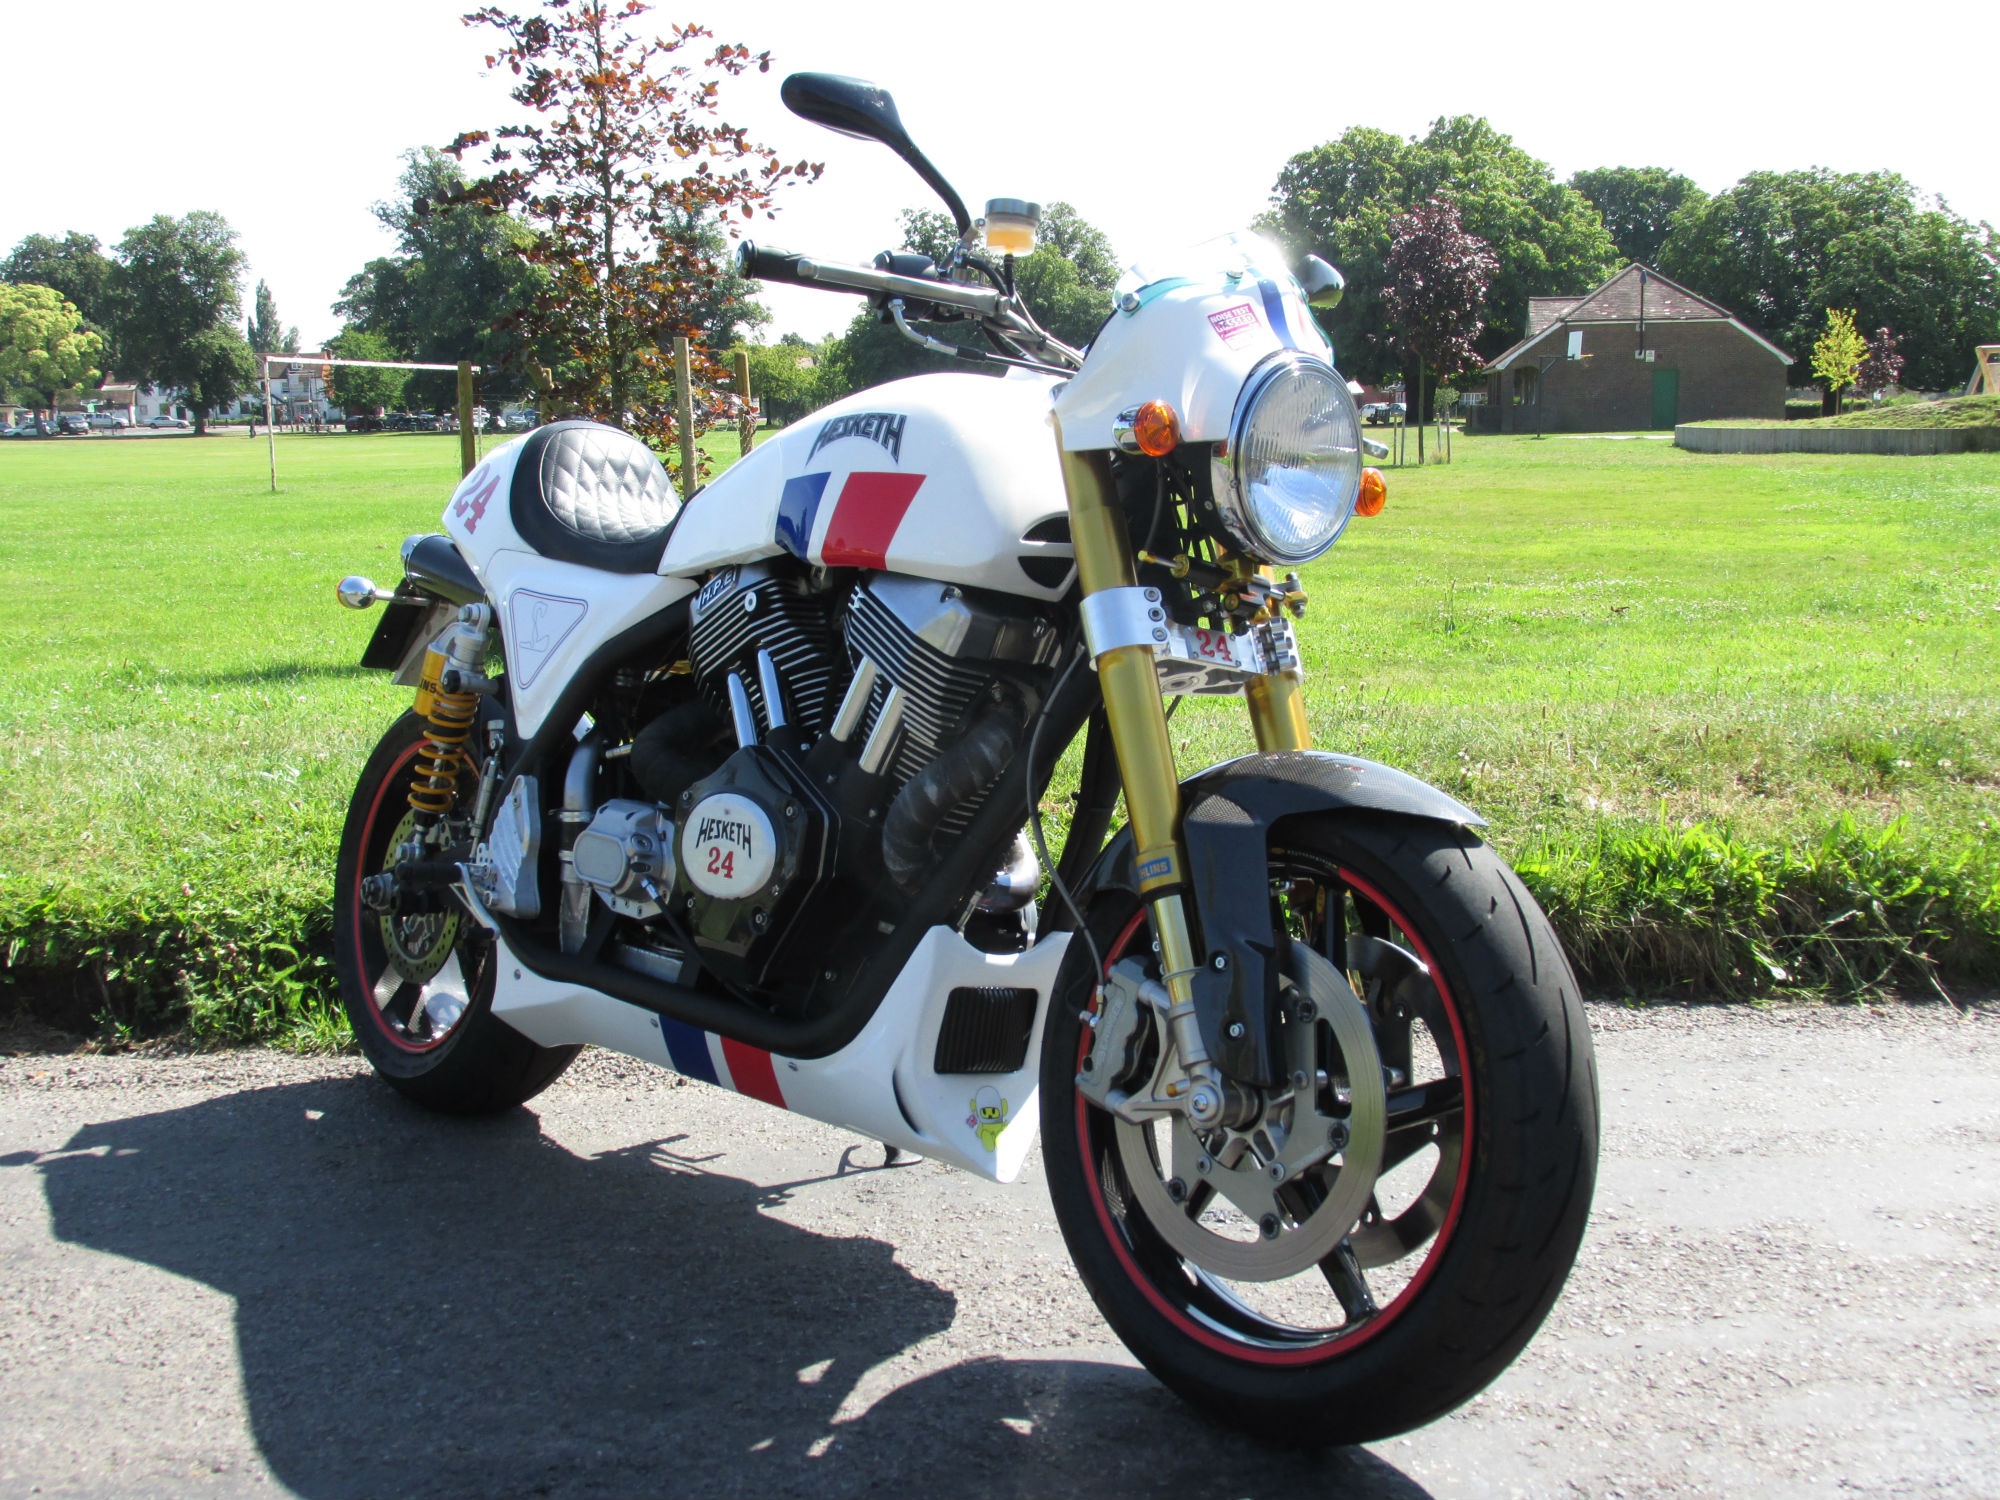 World first test: Hesketh 24 review